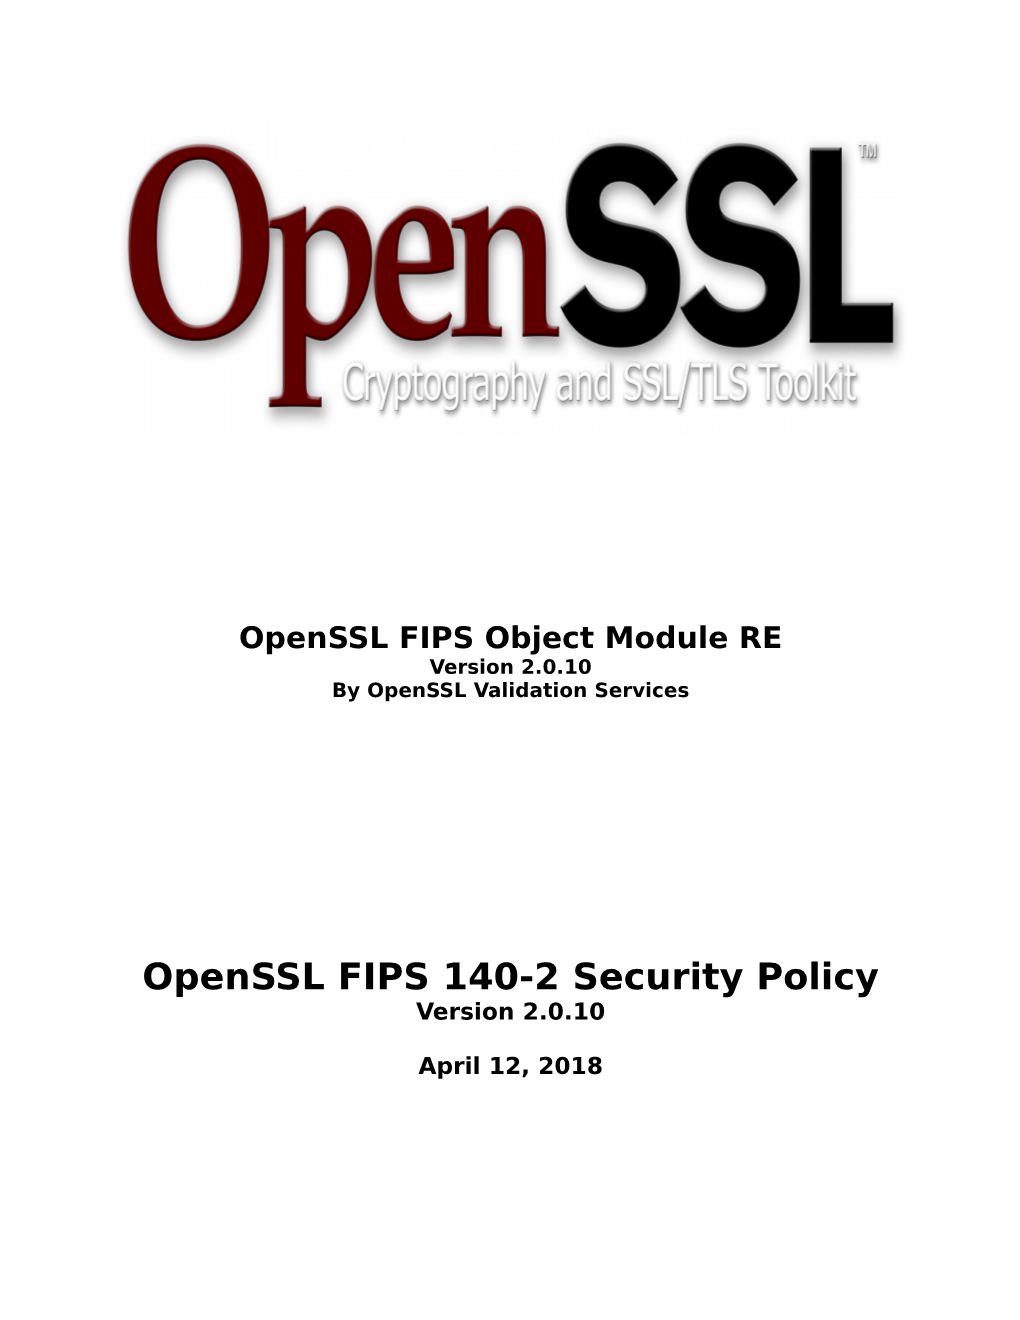 Openssl FIPS 140-2 Security Policy Version 2.0.10